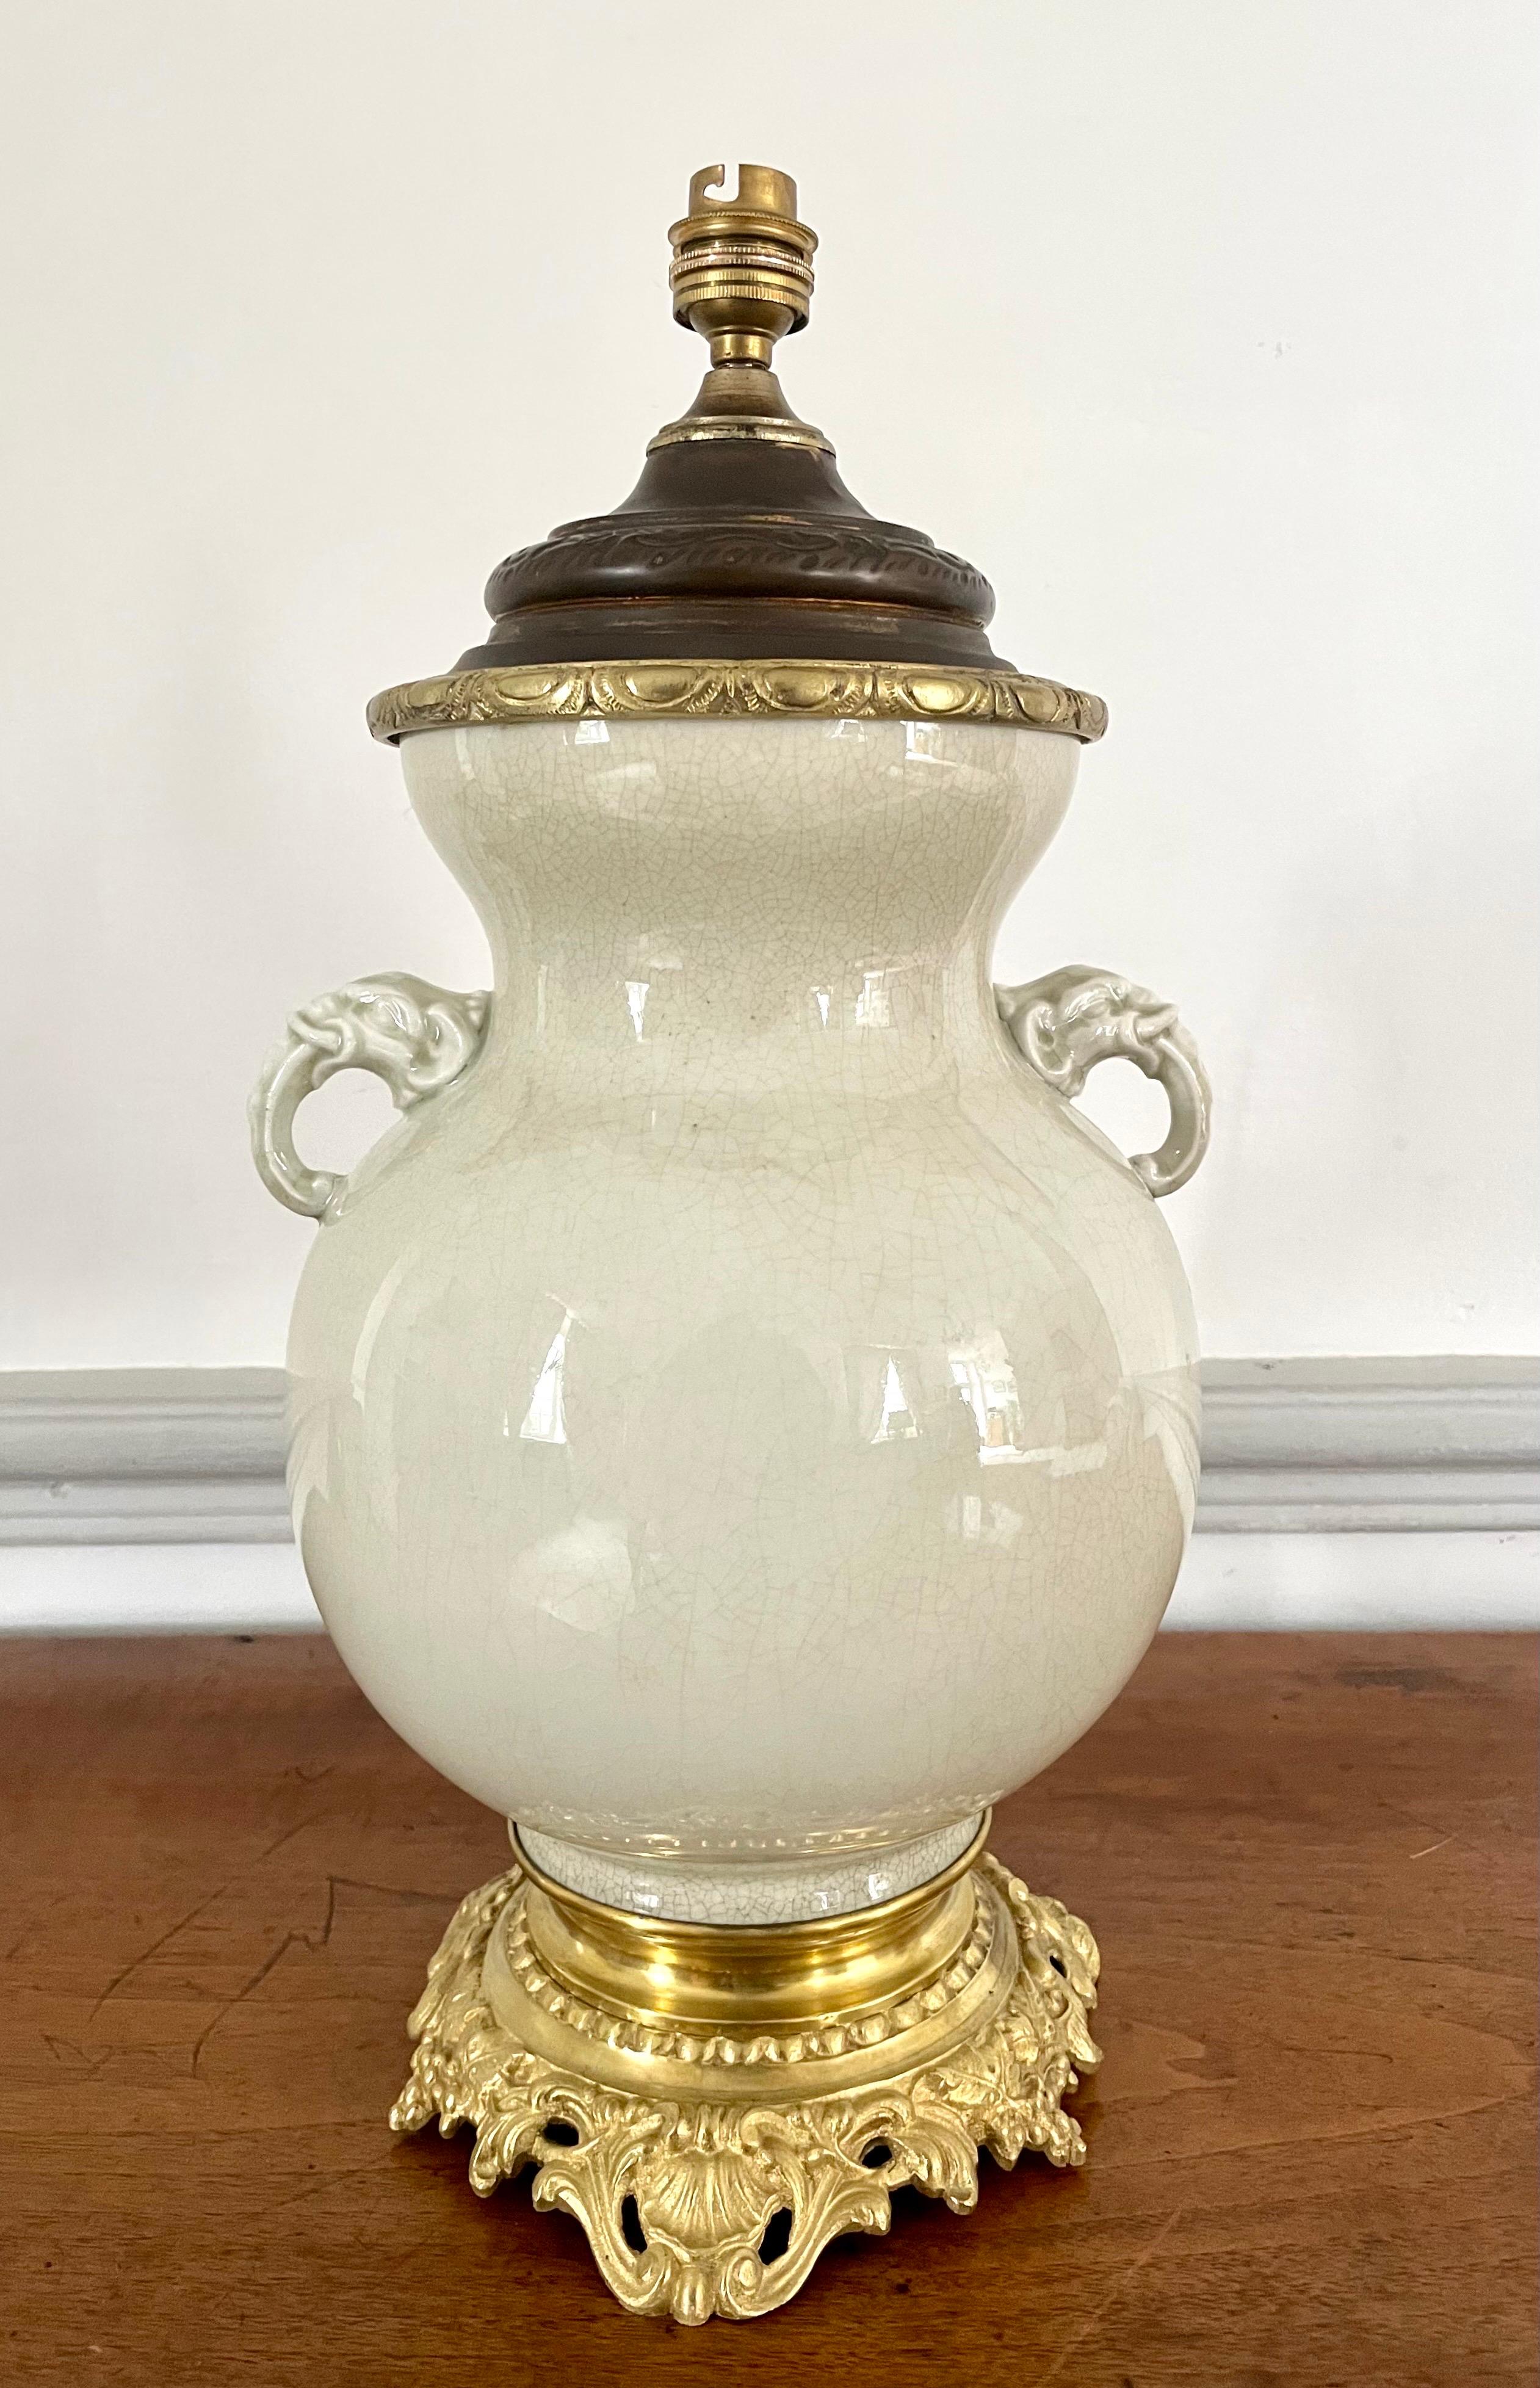 Very beautiful Chinese porcelain vase with cracked glaze with 2 handles in the shape of elephant heads from the Qing Dynasty, mounted as a lamp at the end of the 19th century with a very beautiful Louis XV style frame in gilded and chiseled